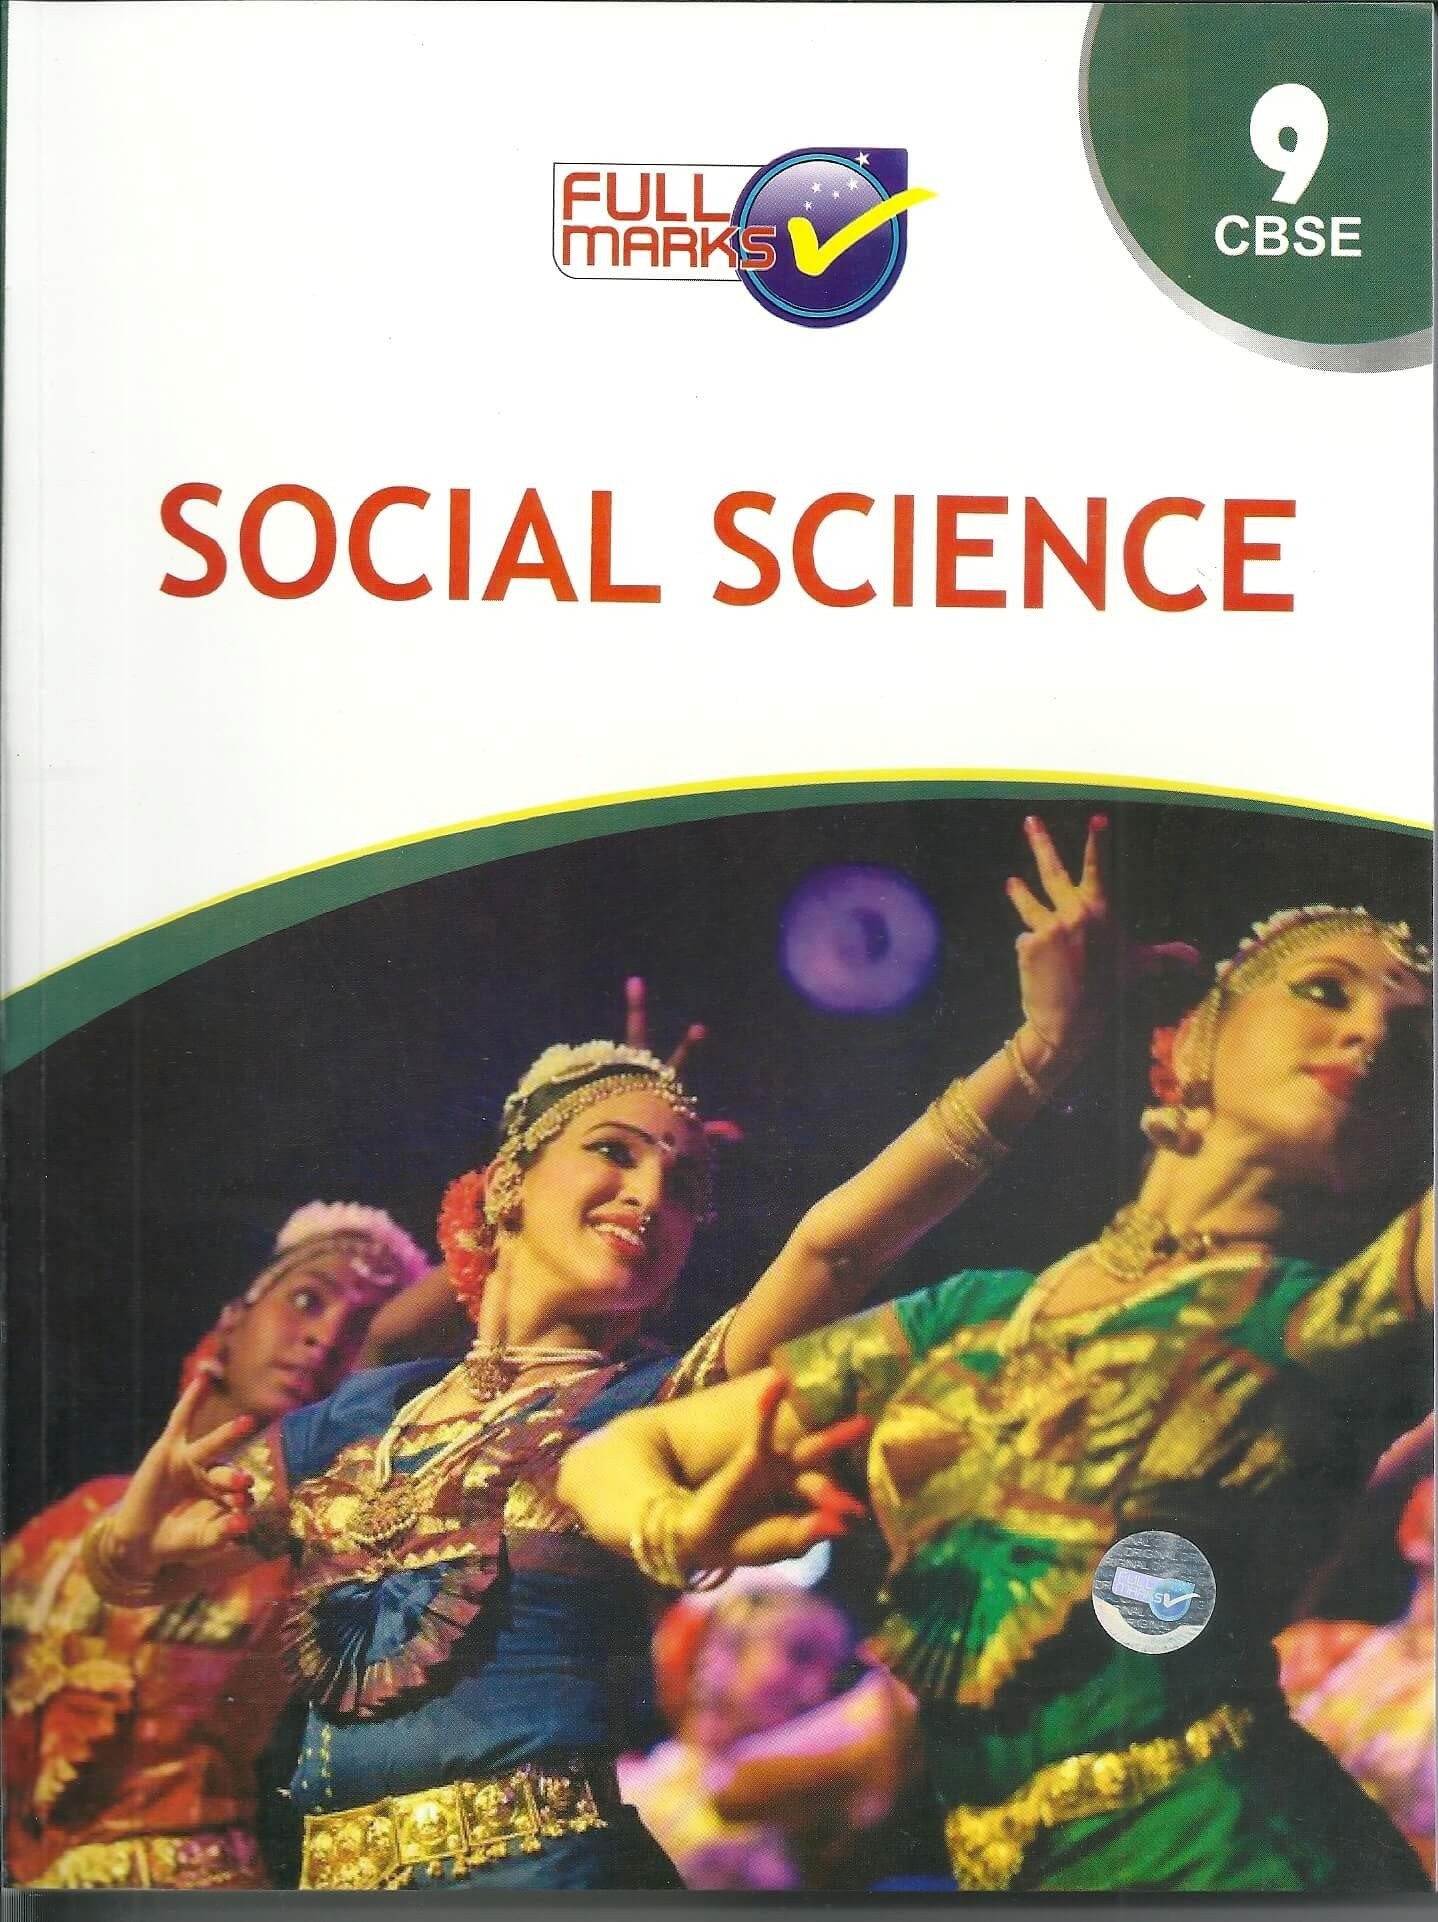 FULL MARKS Social Science Class 9 CBSE Second Hand Books  Snatch Books